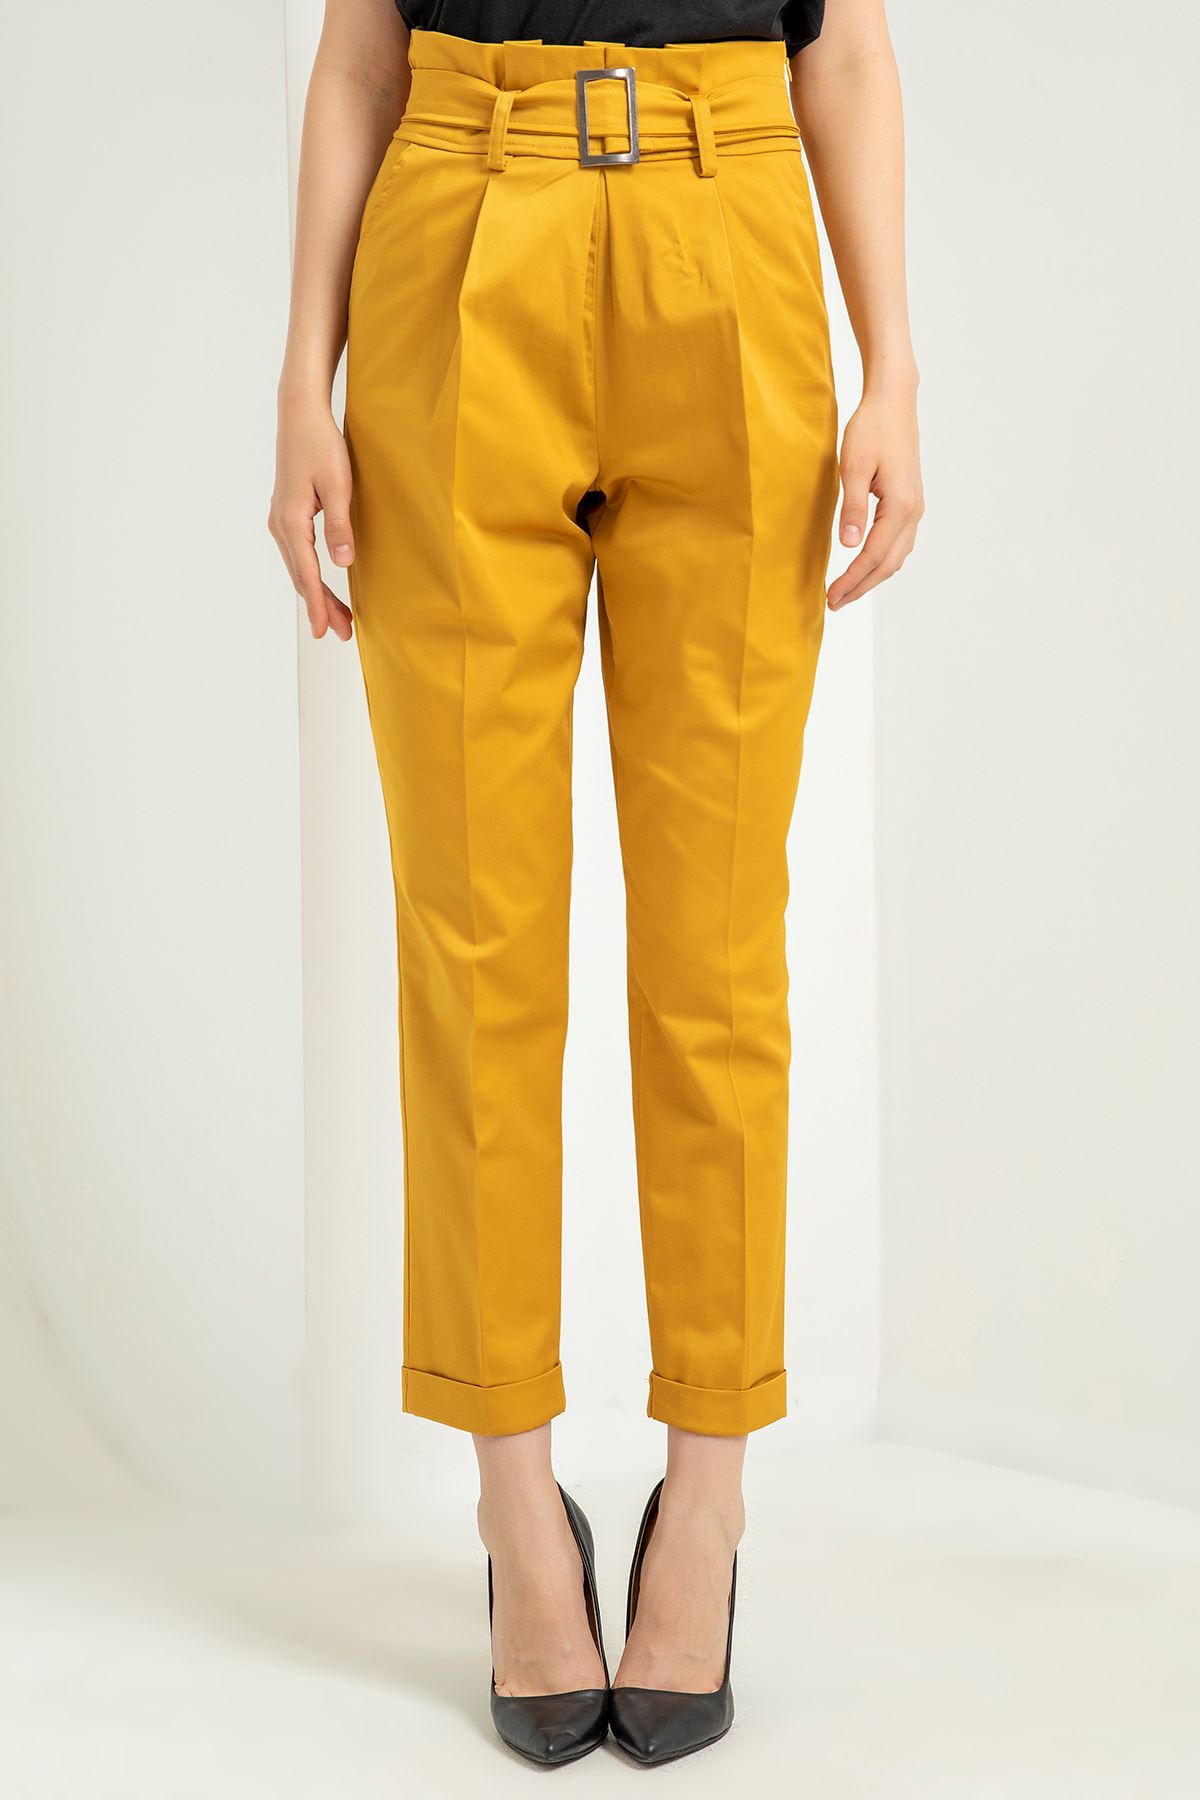 Erika Fabric Ankle Length Carrot Style Women'S Trouserwith Belt - Mustard